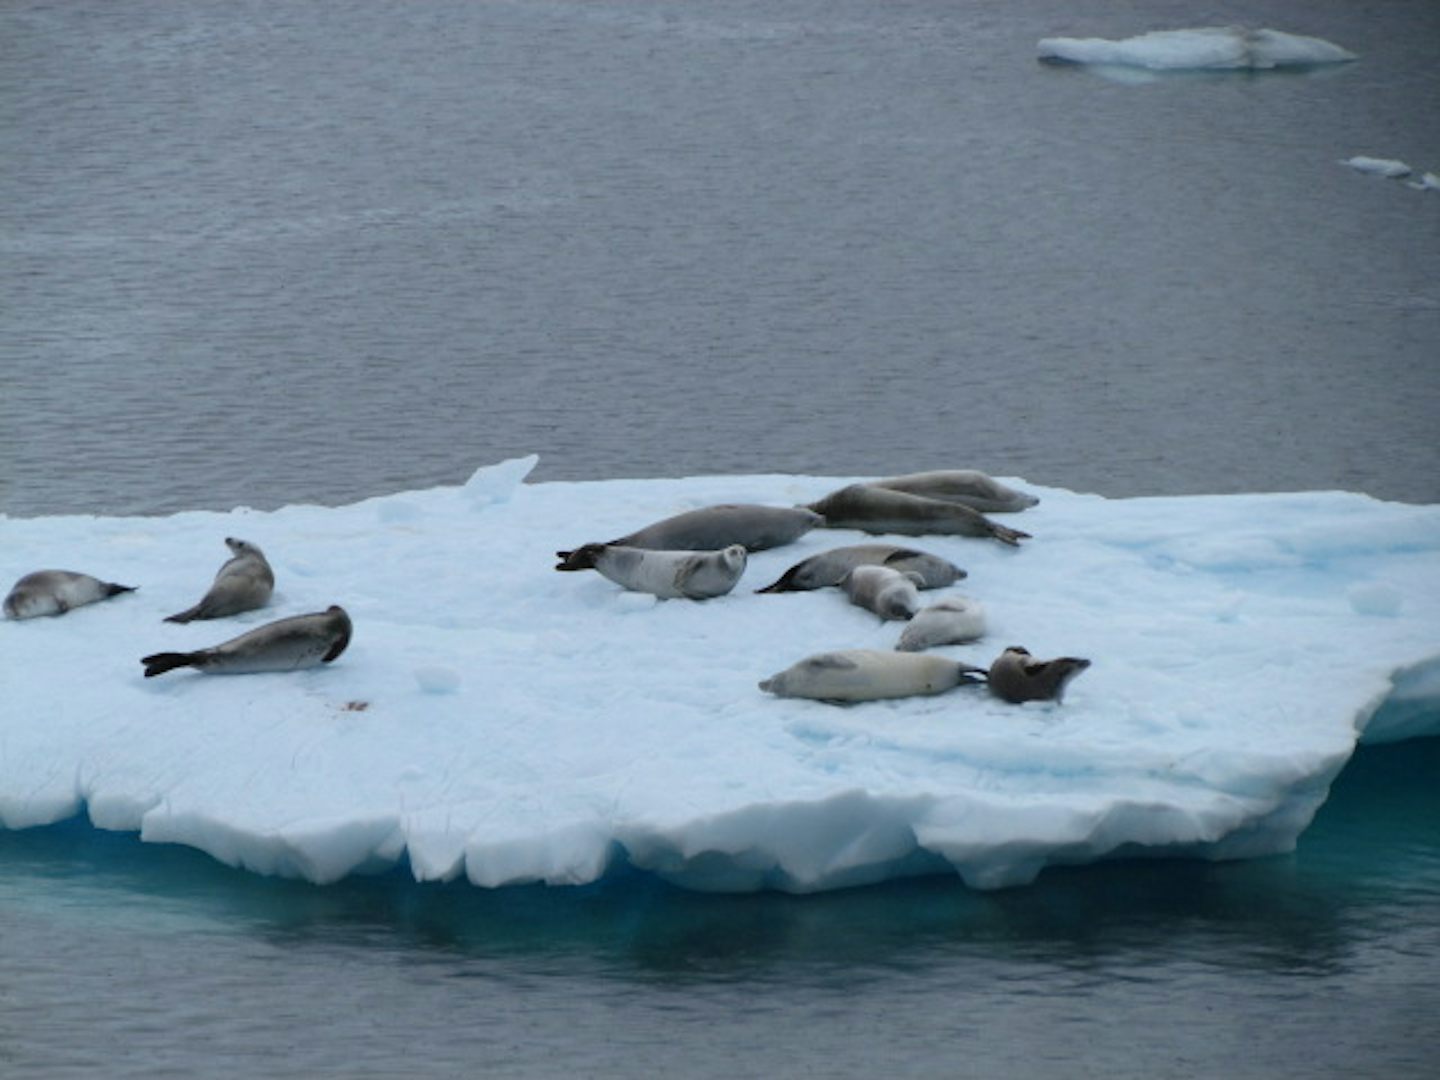 Seals floating on an iceberg in the Antarctic waters.